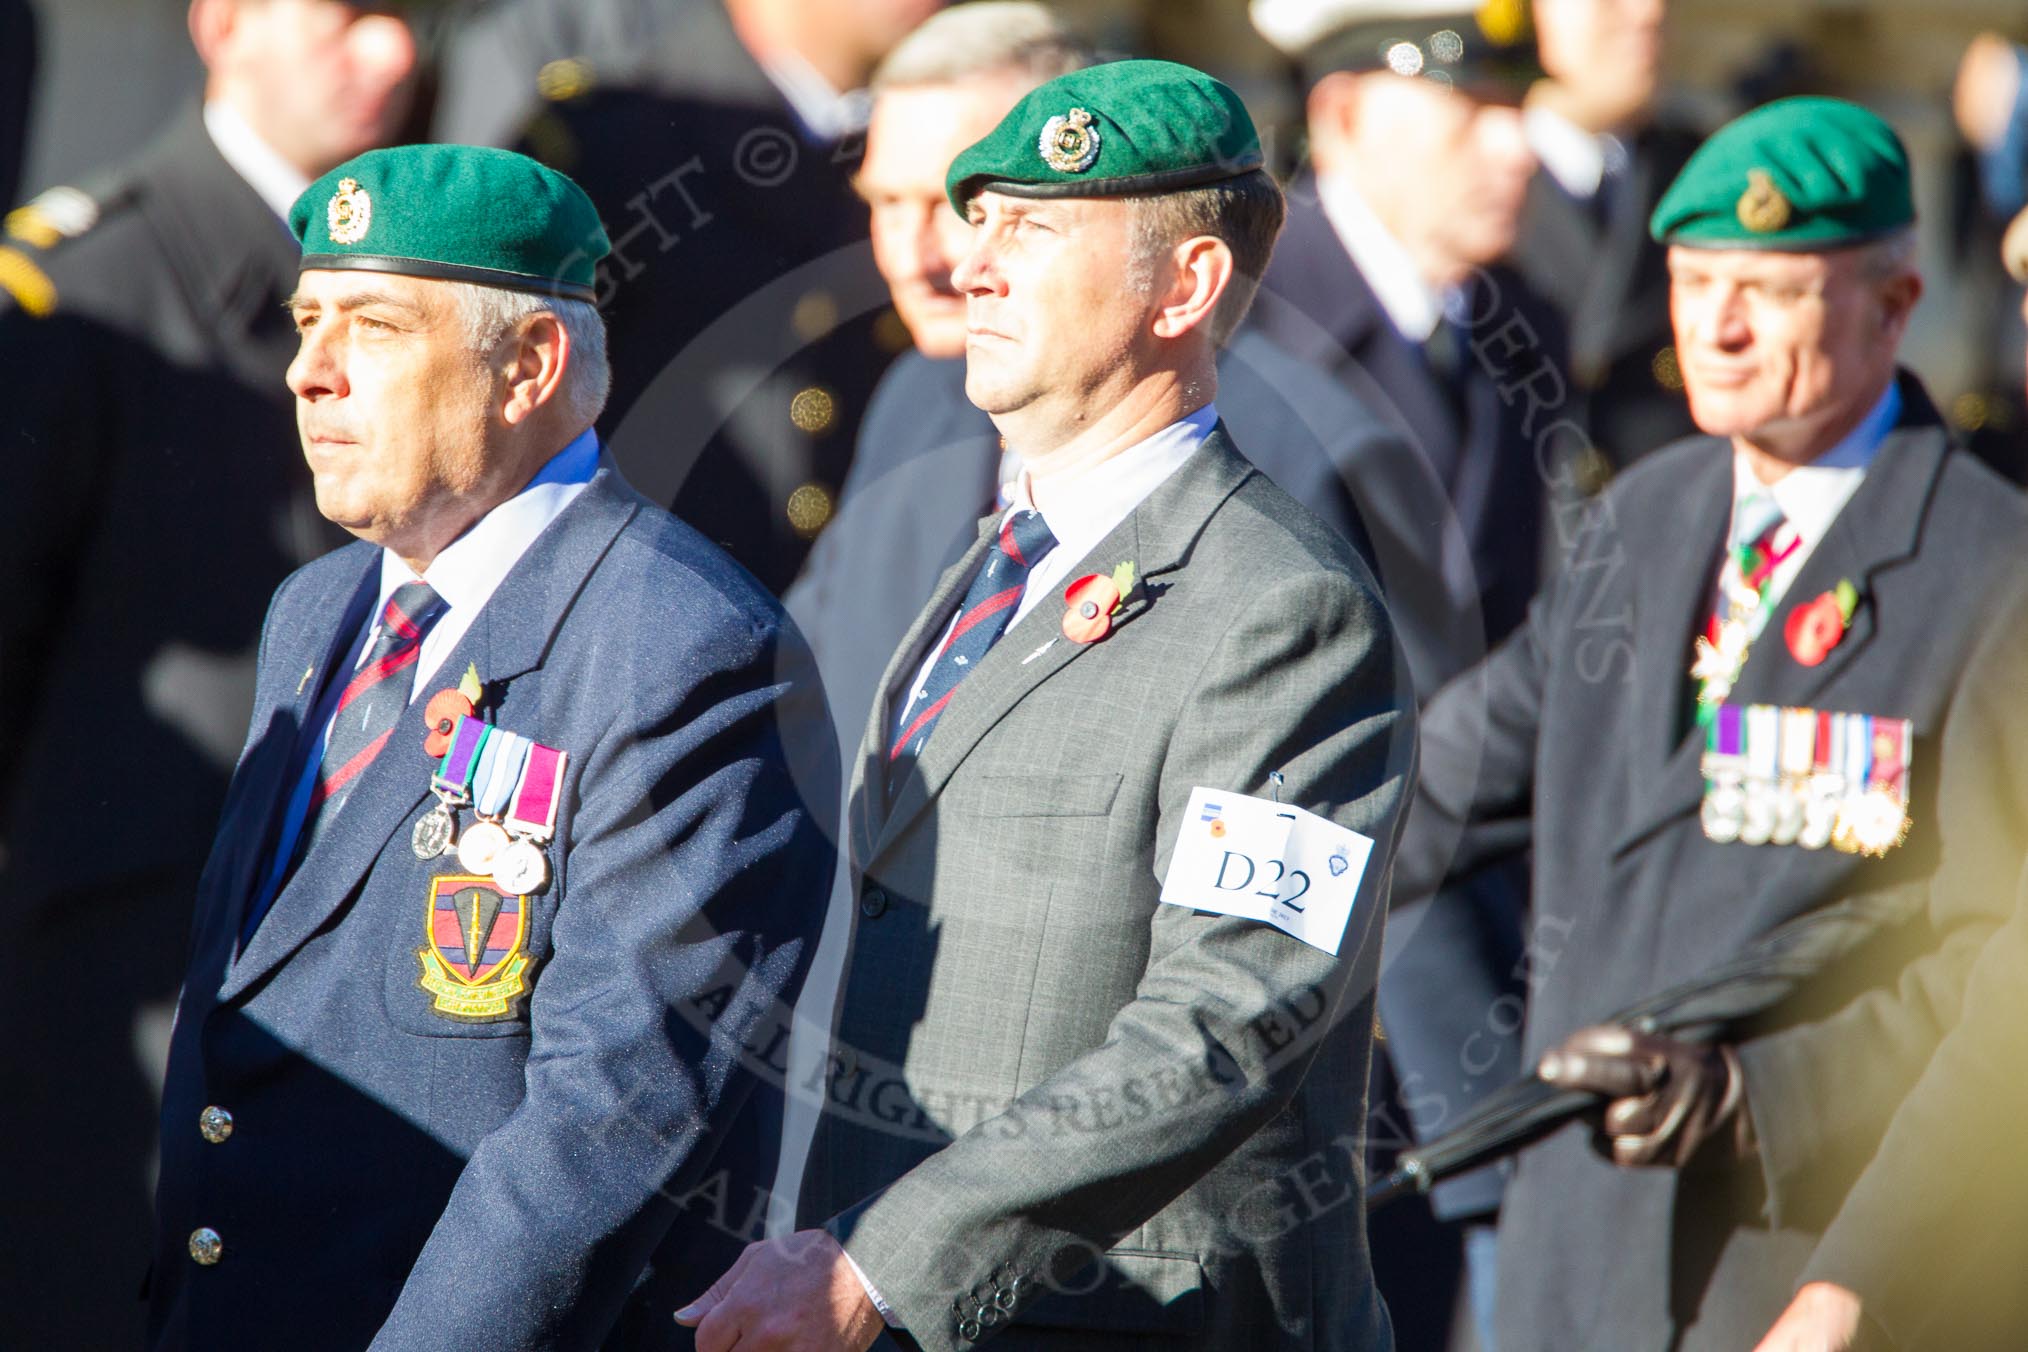 Remembrance Sunday Cenotaph March Past 2013: D22 - the Commando Veterans Association with 30 marchers..
Press stand opposite the Foreign Office building, Whitehall, London SW1,
London,
Greater London,
United Kingdom,
on 10 November 2013 at 11:41, image #162